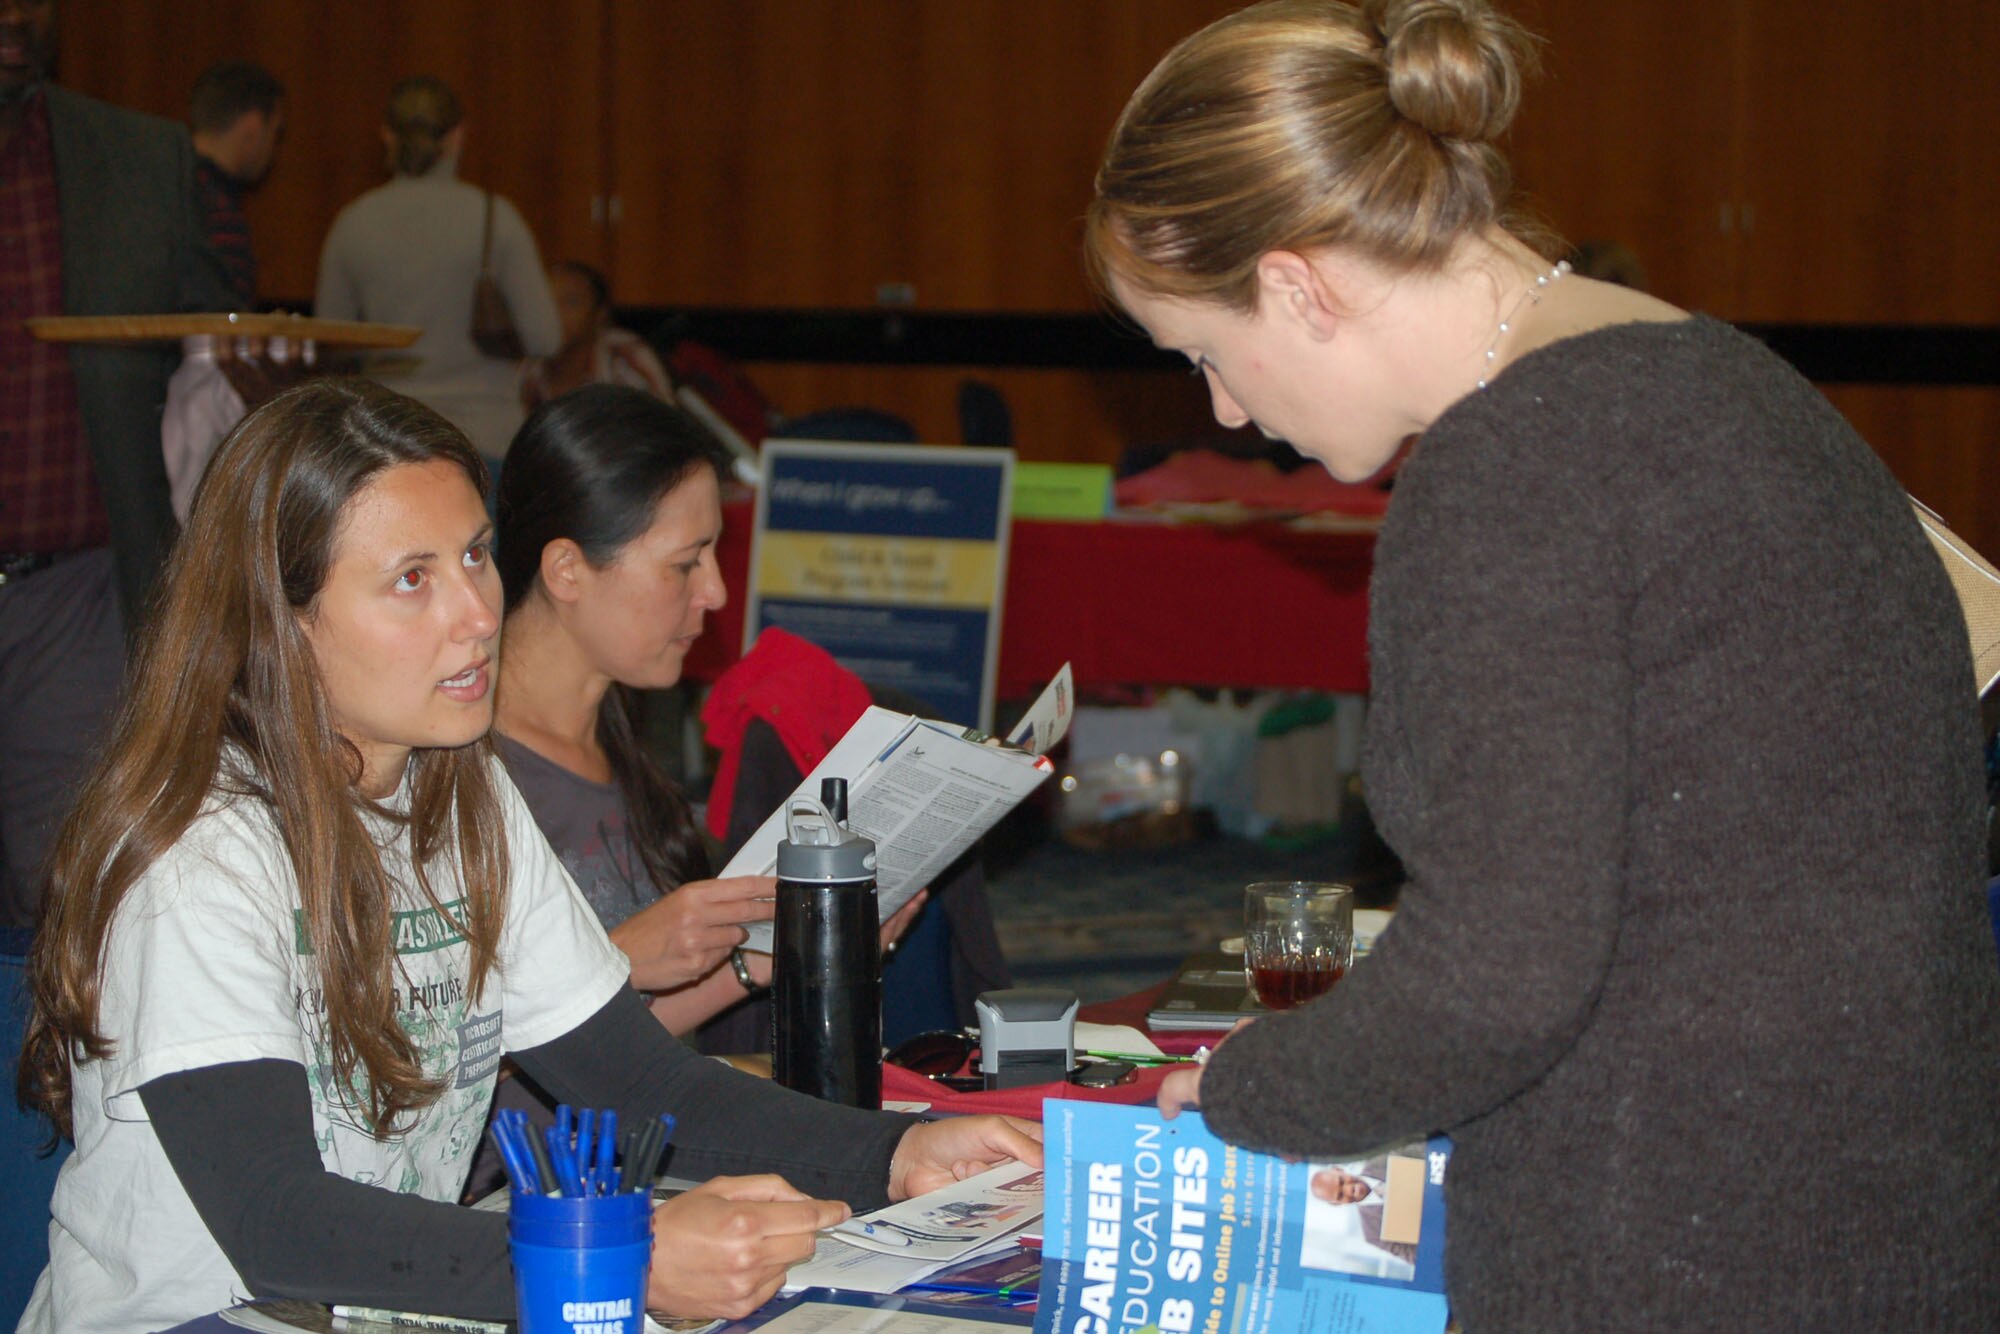 SPANGDAHLEM AIR BASE, Germany – Laurie Clark, Spangdahlem Central Texas College field representative (left), talks to Charlotte Torrez, a Saber spouse, about education opportunities through the college during the Annual Job Fair Sept. 17 at Club Eifel. The event, hosted by the Airmen & Family Readiness Center, provided information about job prospects, career advancement, military spouse benefits, education programs, reintegration programs and volunteer opportunities. (U.S. Air Force photo/Senior Airman Kali L. Gradishar)